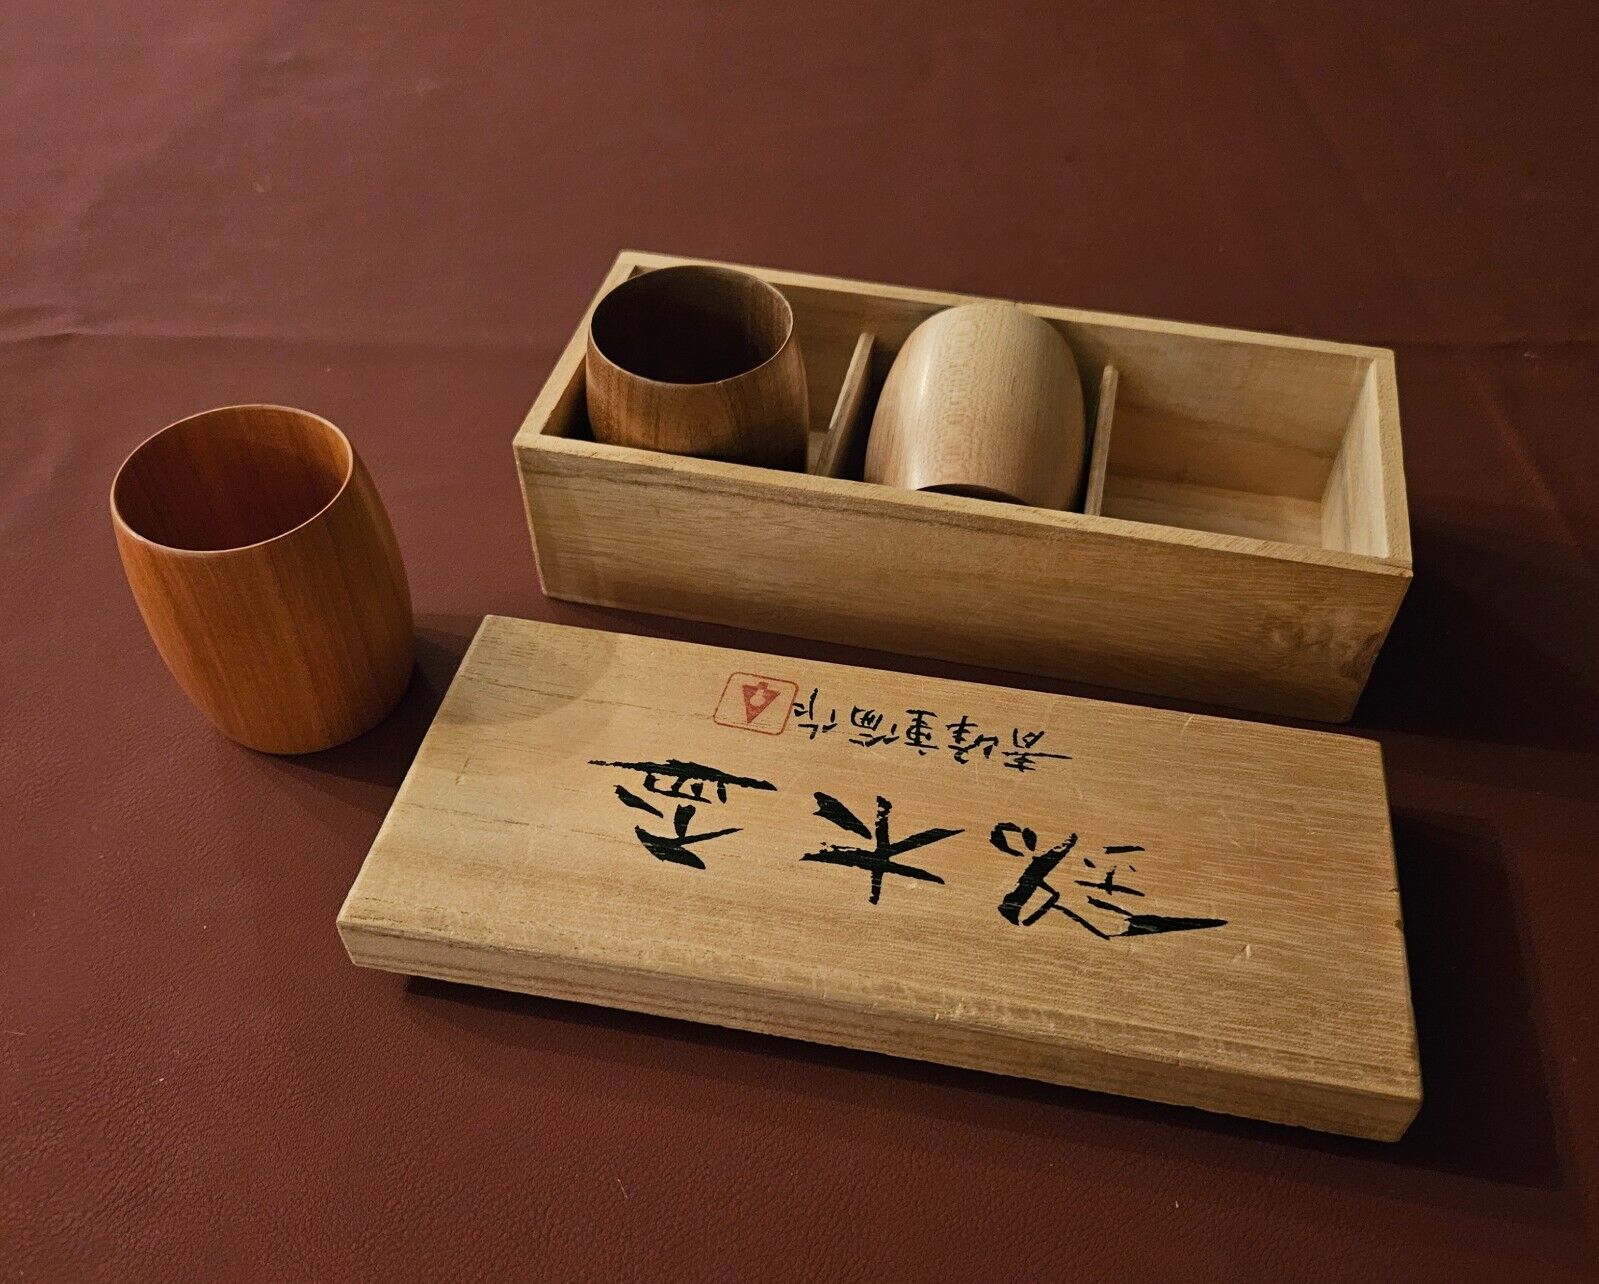 Japanese Wooden Sake Cups by Shigemichi Aomine (1916 - 2001)